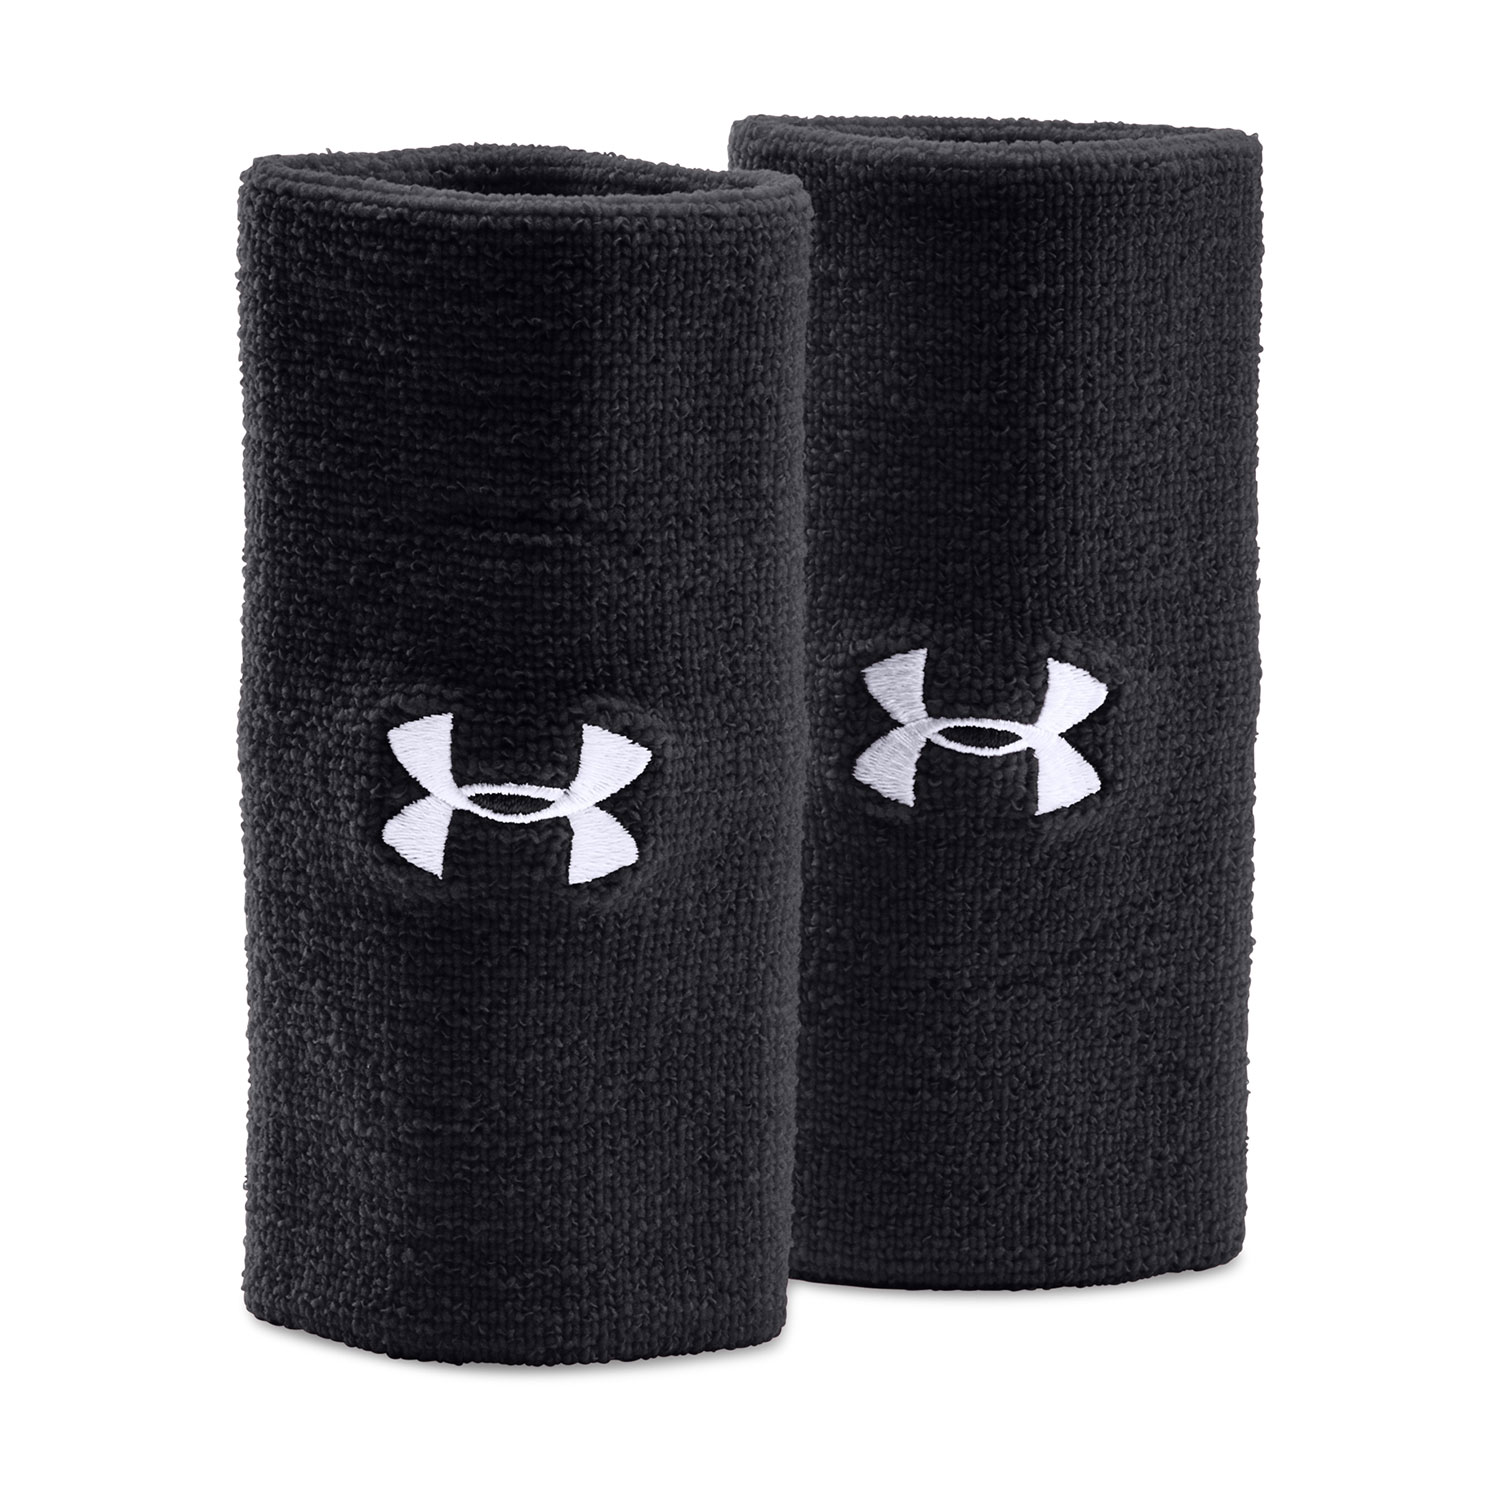 Under Armour Performance Long Wristbands - Black/White